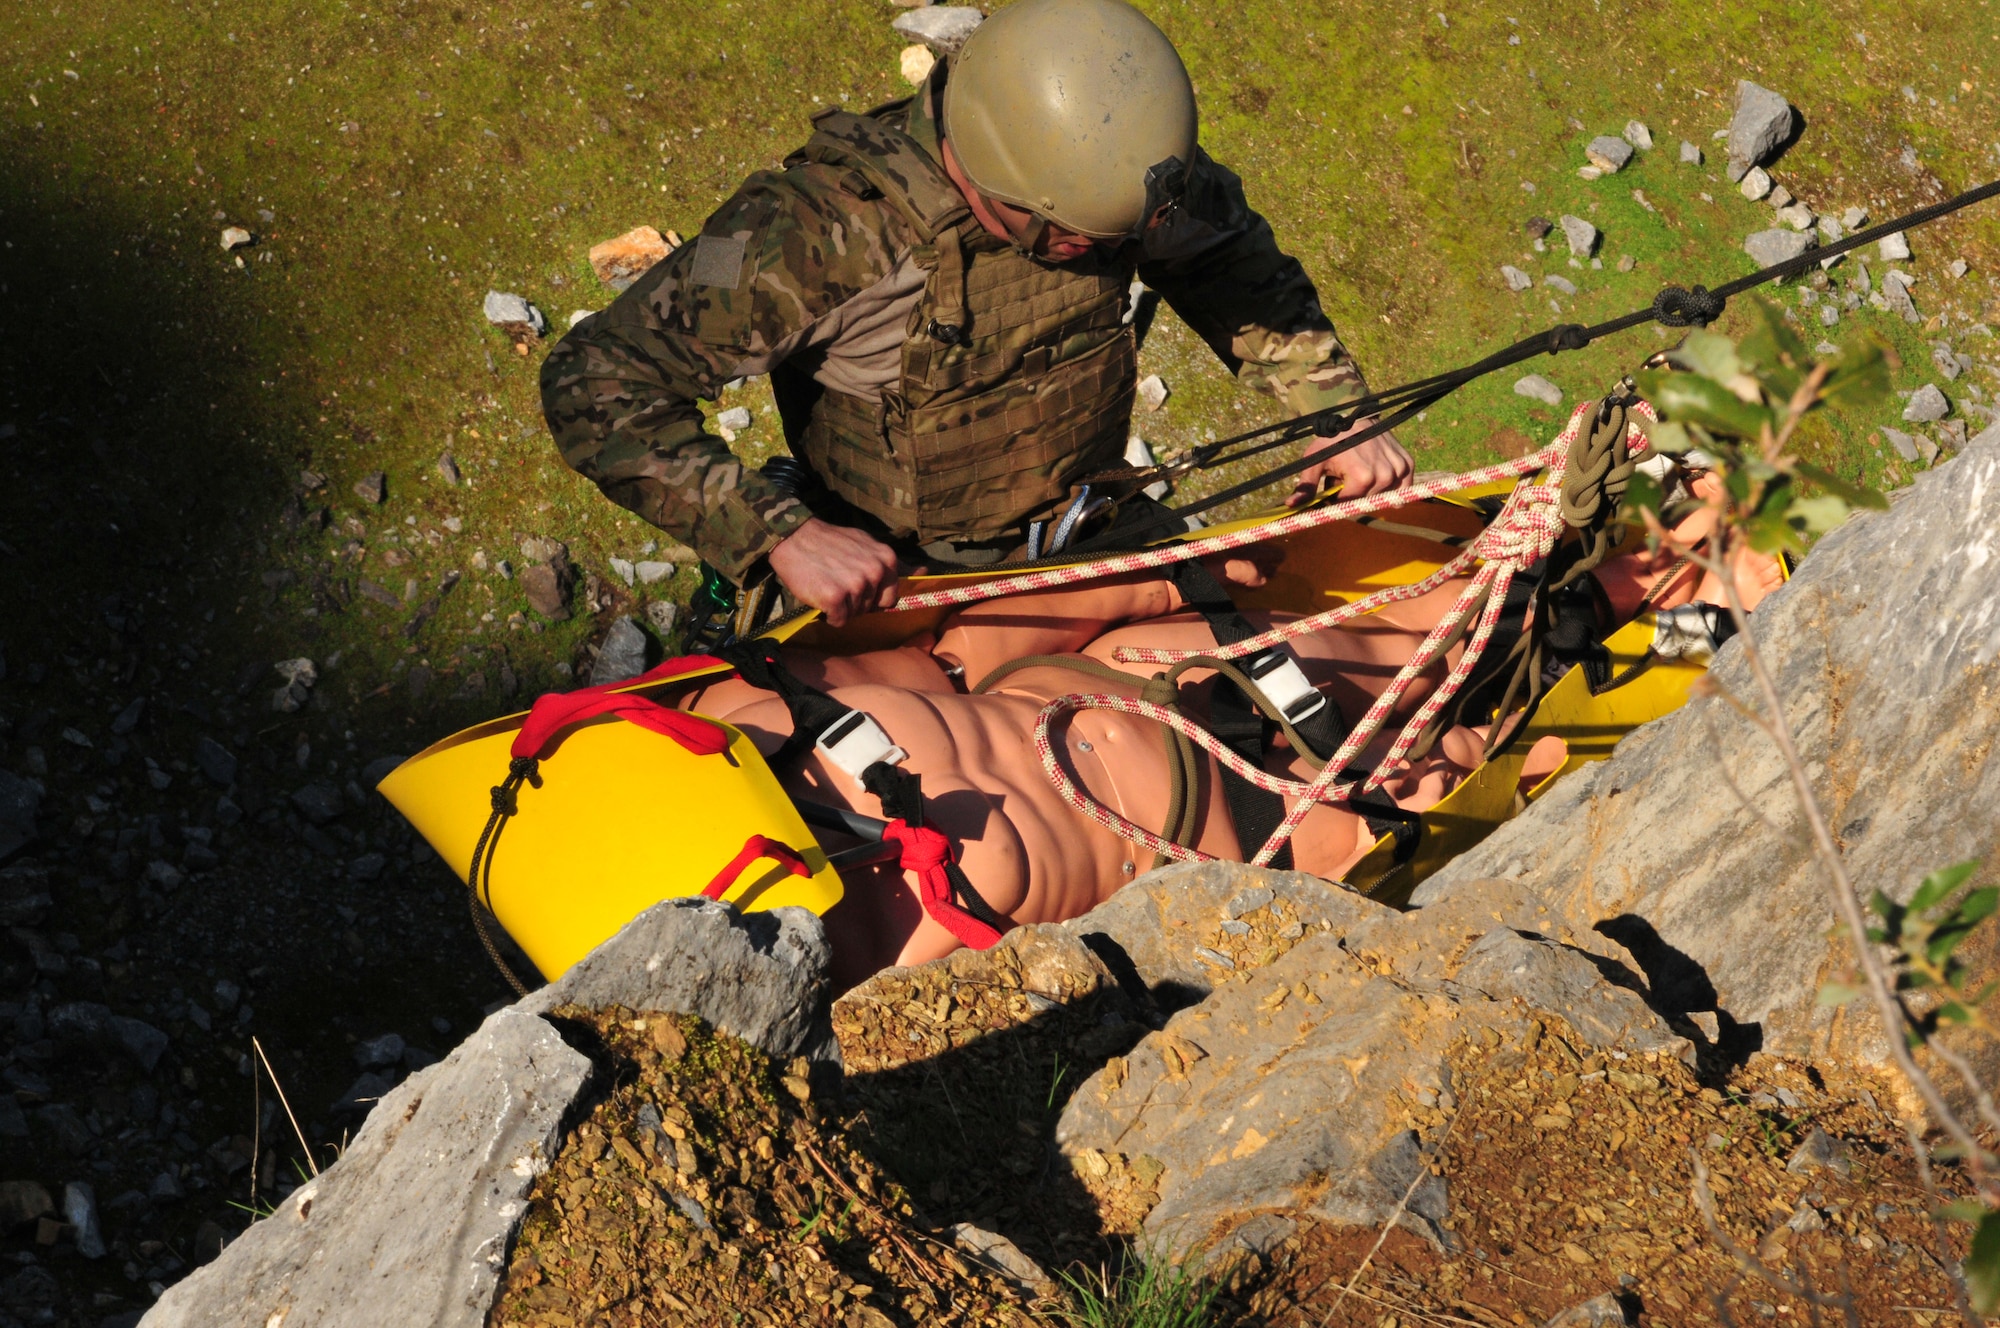 Staff Sgt. Scott Love, 9th Civil Engineer Squadron explosive ordnance disposal technician from Beale Air Force Base, Calif., carefully guides a practice victim down a cliff during mountain warfare training in Auburn, Calif., Feb 17, 2012. Beale's EOD flight trains extensively on the removal of casualties, explosives and weapons caches from mountainous terrain. (U.S. Air Force photo by Airman 1st Class Rachael Kane/Released)